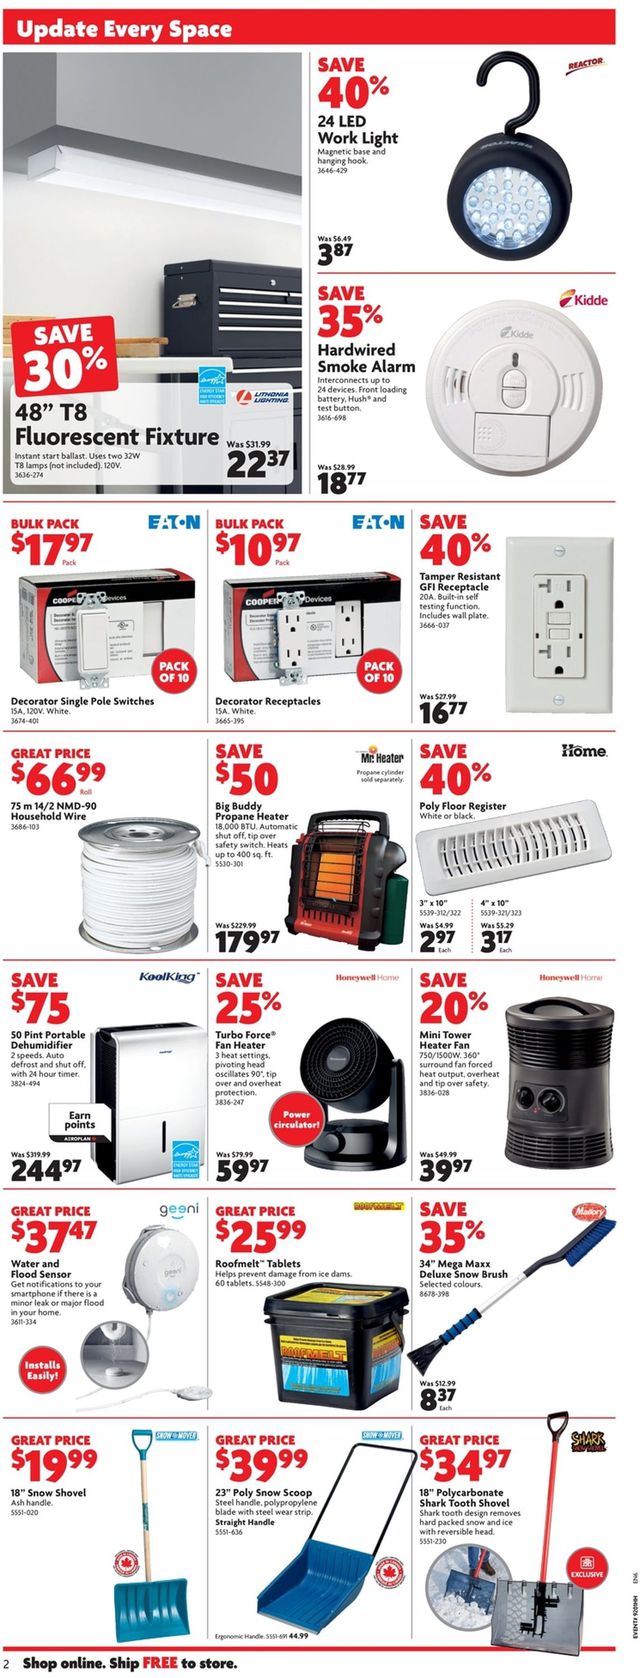 Home Hardware Flyer from 01/07/2021